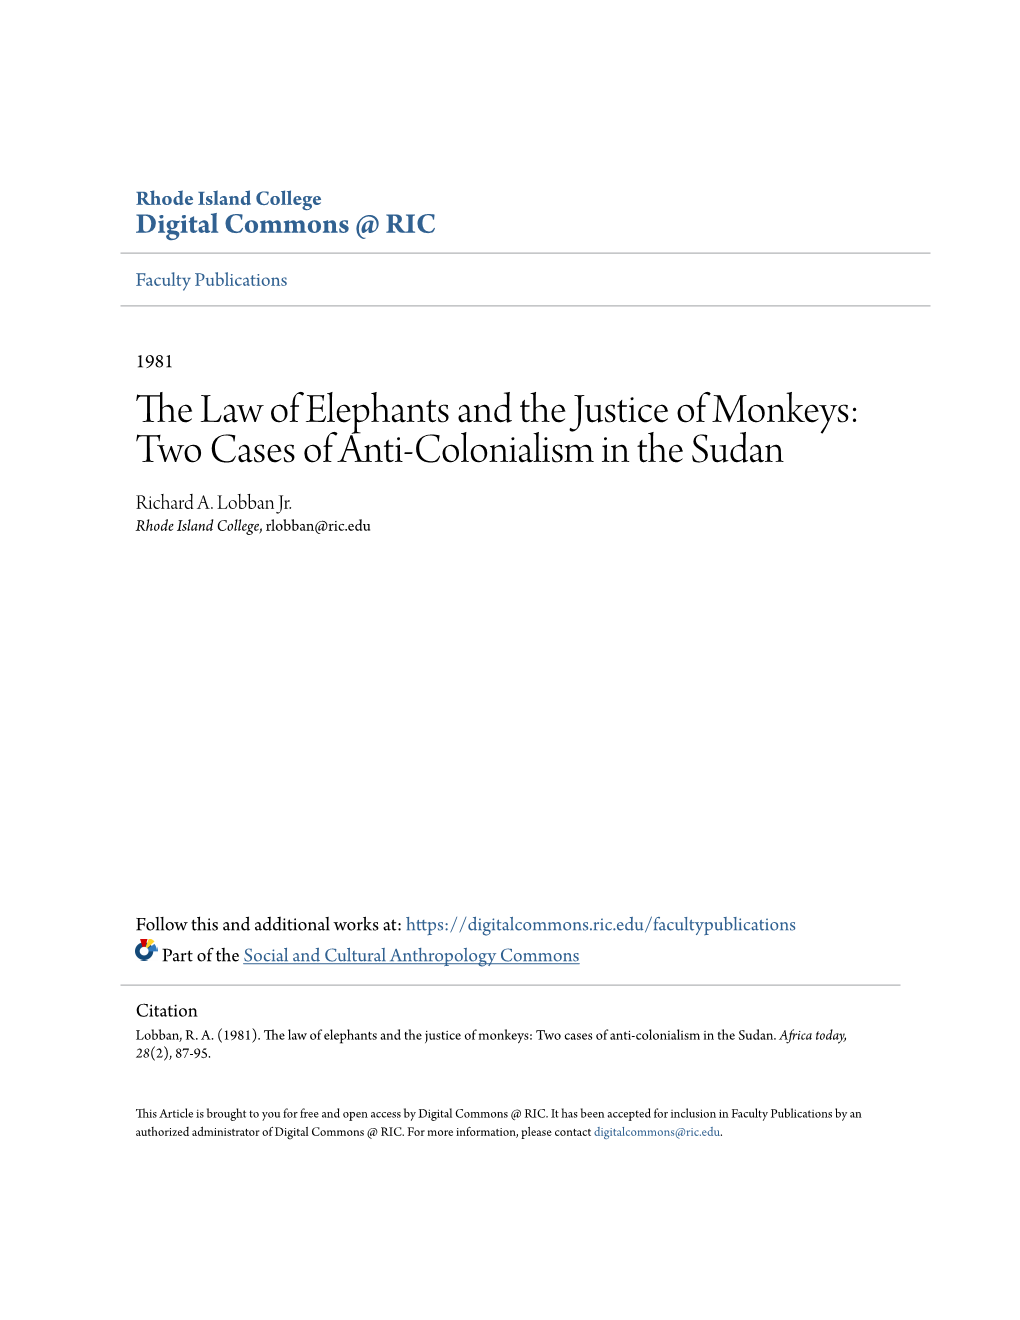 The Law of Elephants and the Justice of Monkeys: Two Cases of Anti-Colonialism in the Sudan Richard A